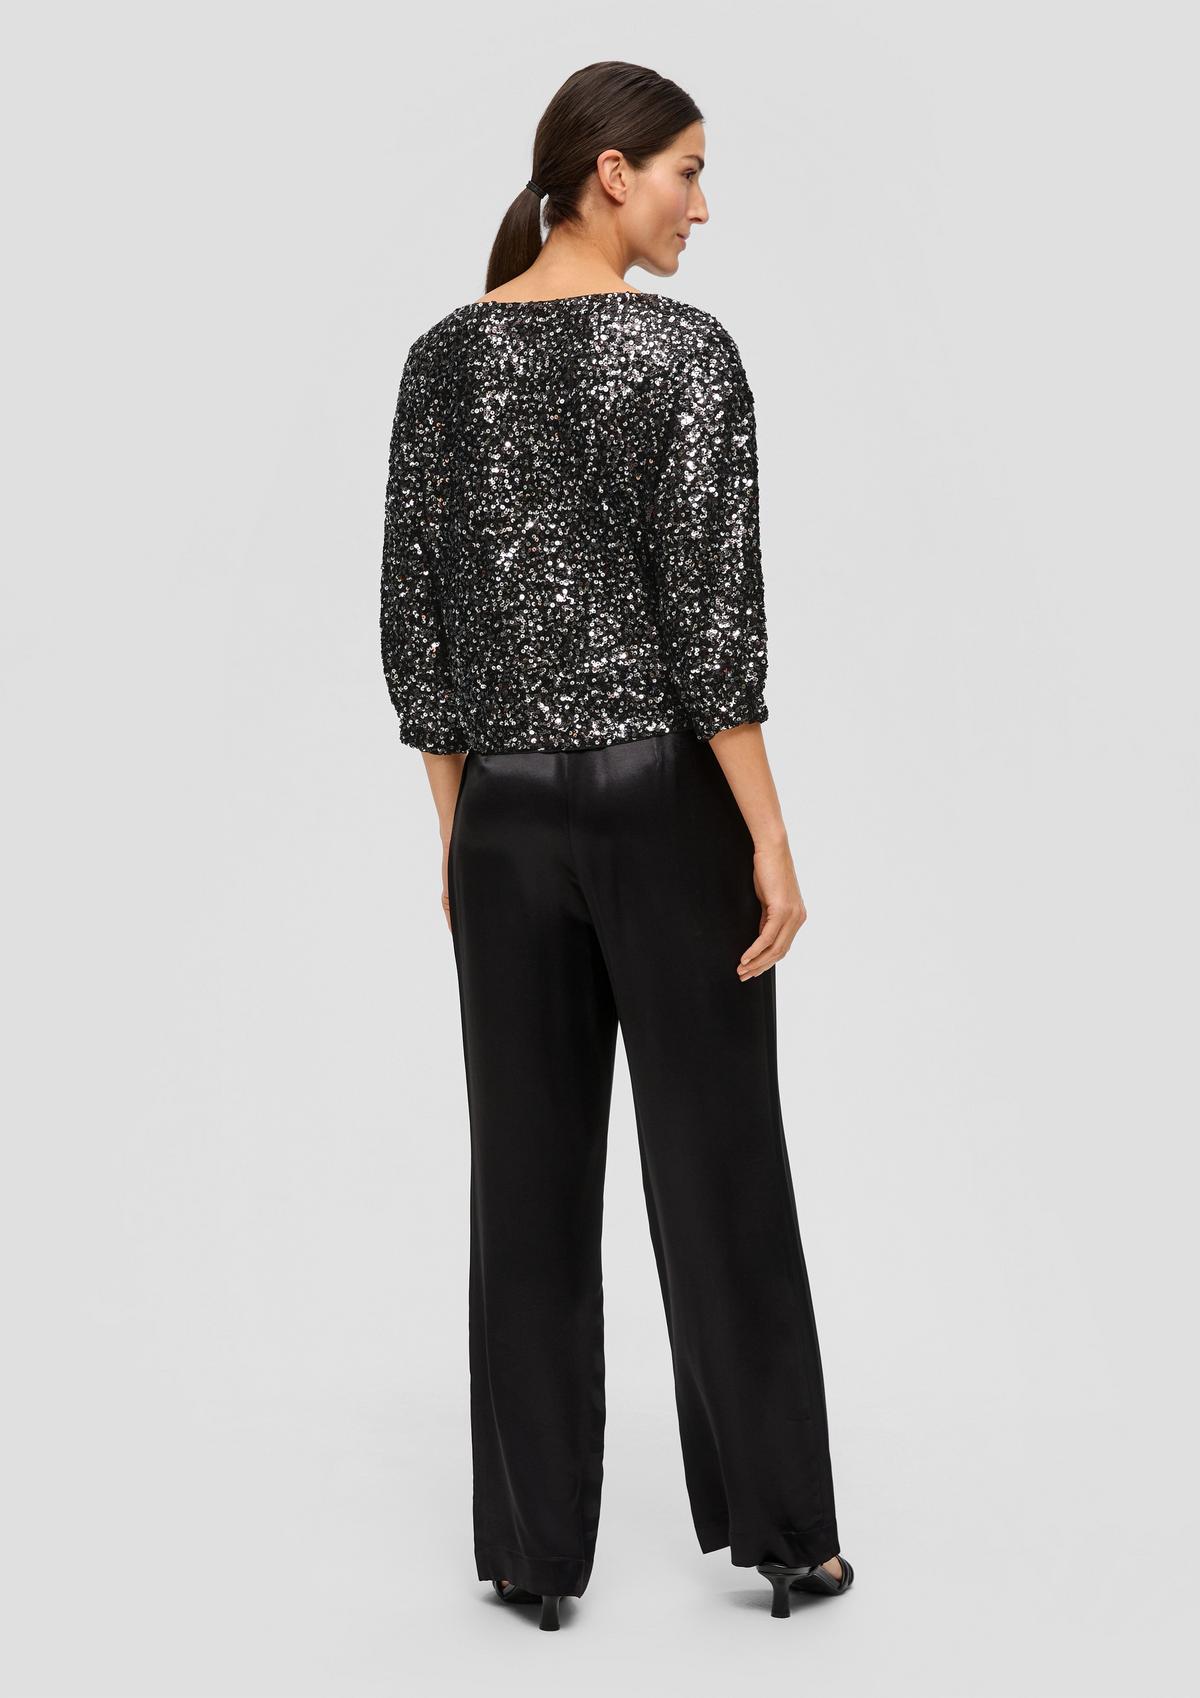 s.Oliver Mesh blouse with sequin trim